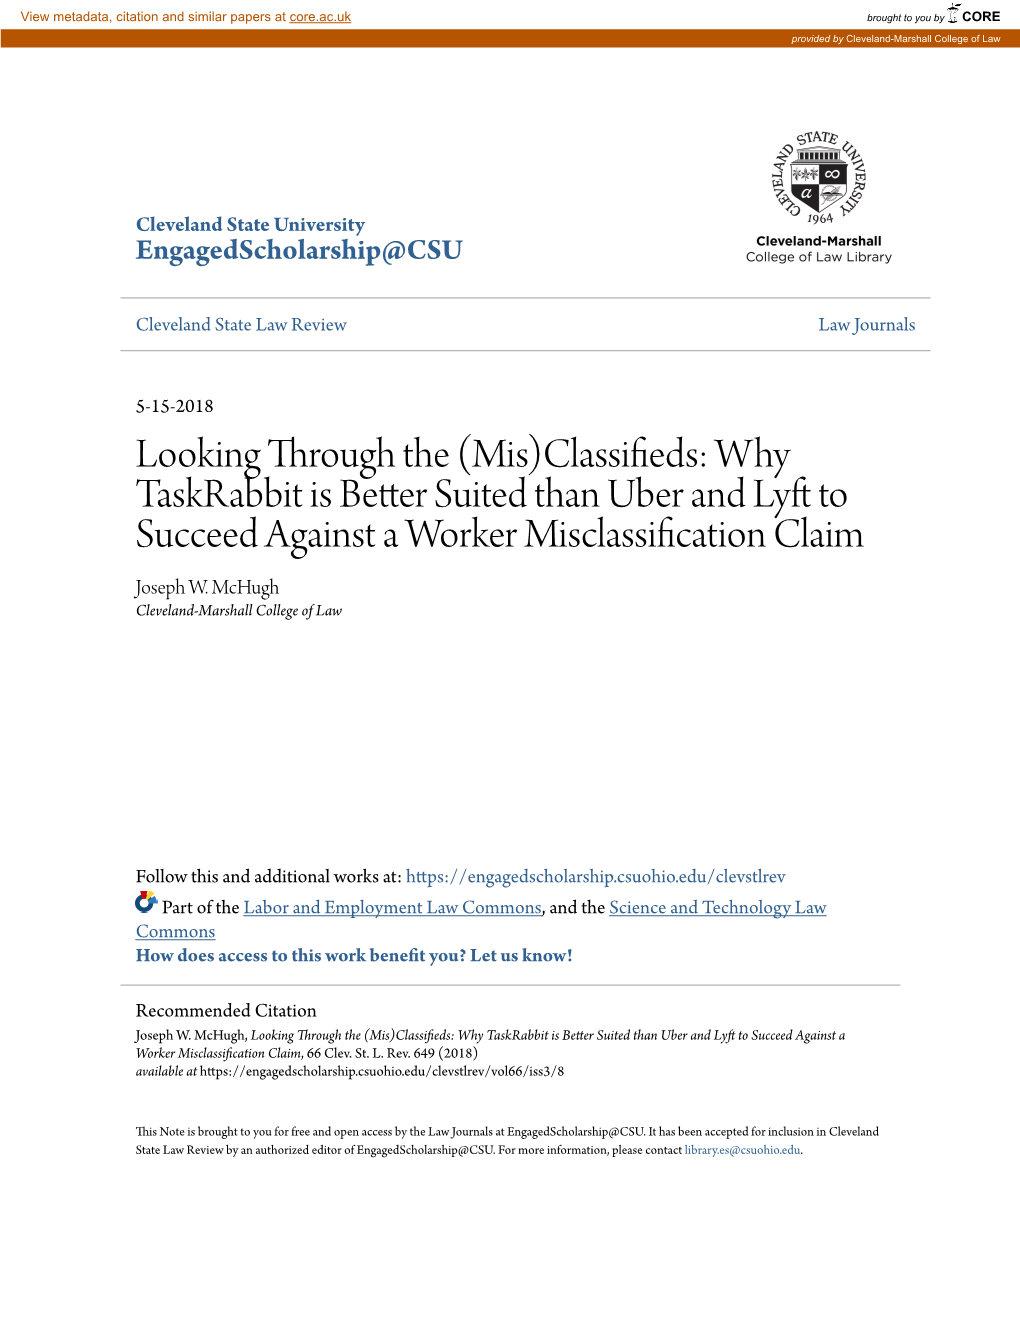 Why Taskrabbit Is Better Suited Than Uber and Lyft to Succeed Against a Worker Misclassification Claim